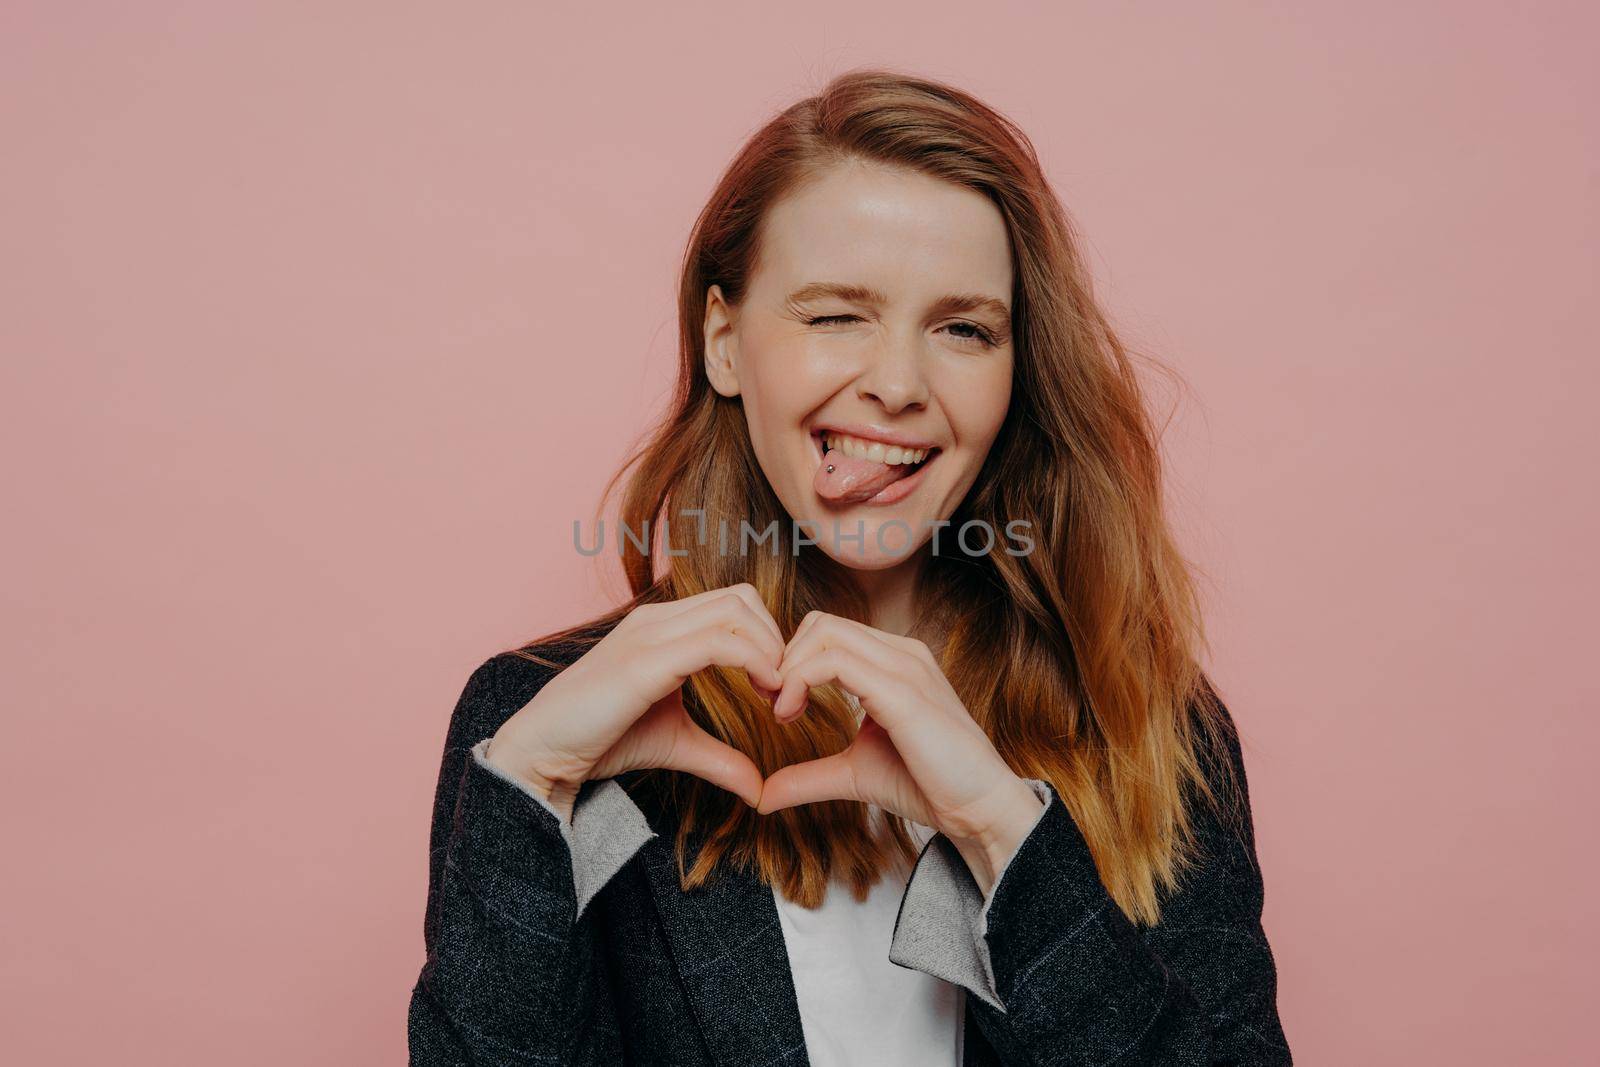 Happy excited young woman showing heart shape sign by vkstock